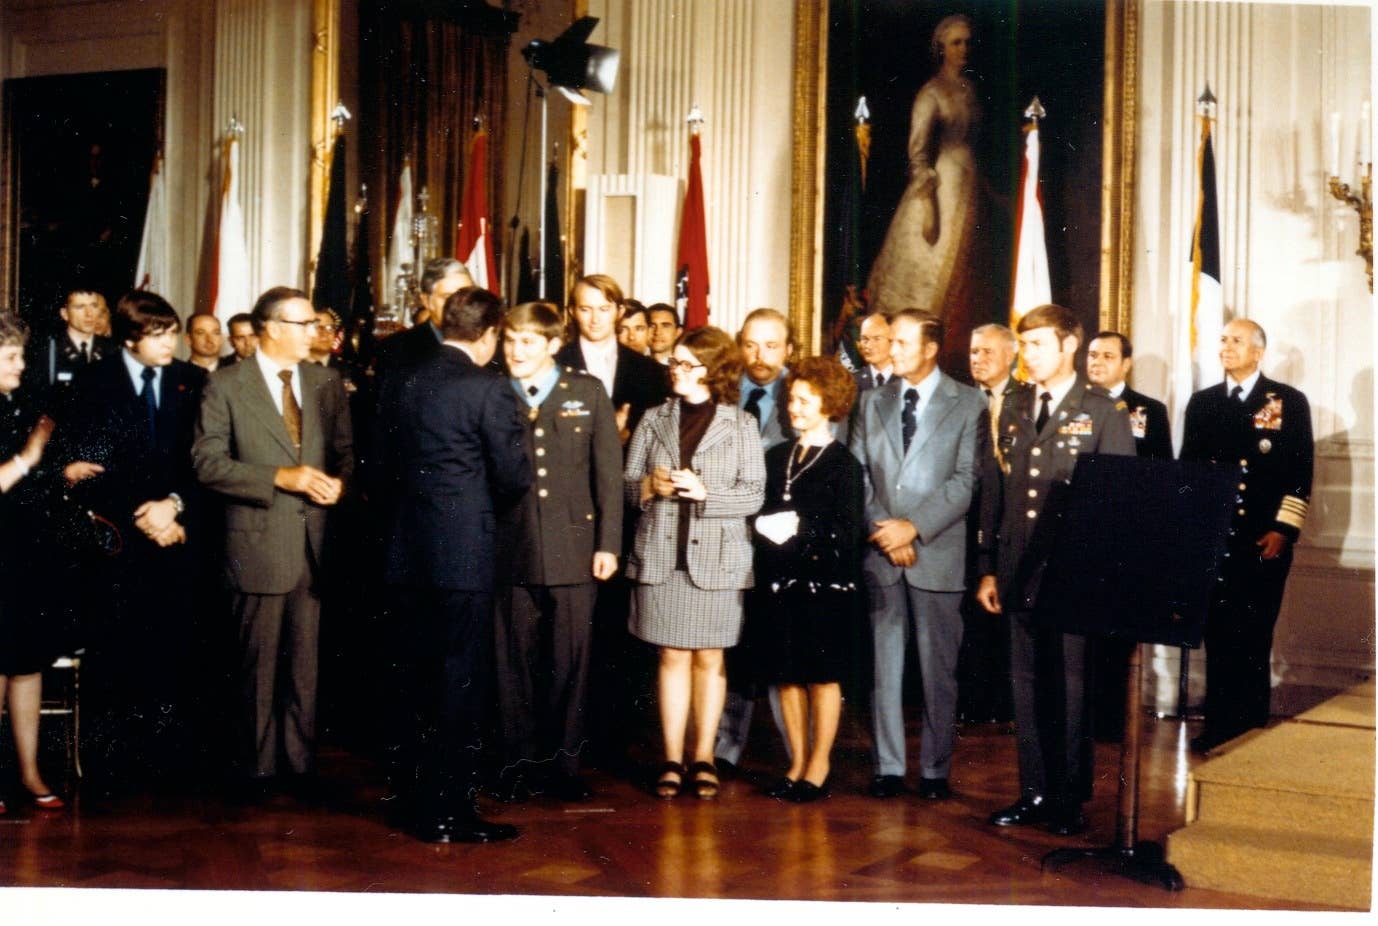 This is a photo of Fitzmaurice receiving the Medal of Honor from President Nixon, so you can probably imagine what's about to happen.